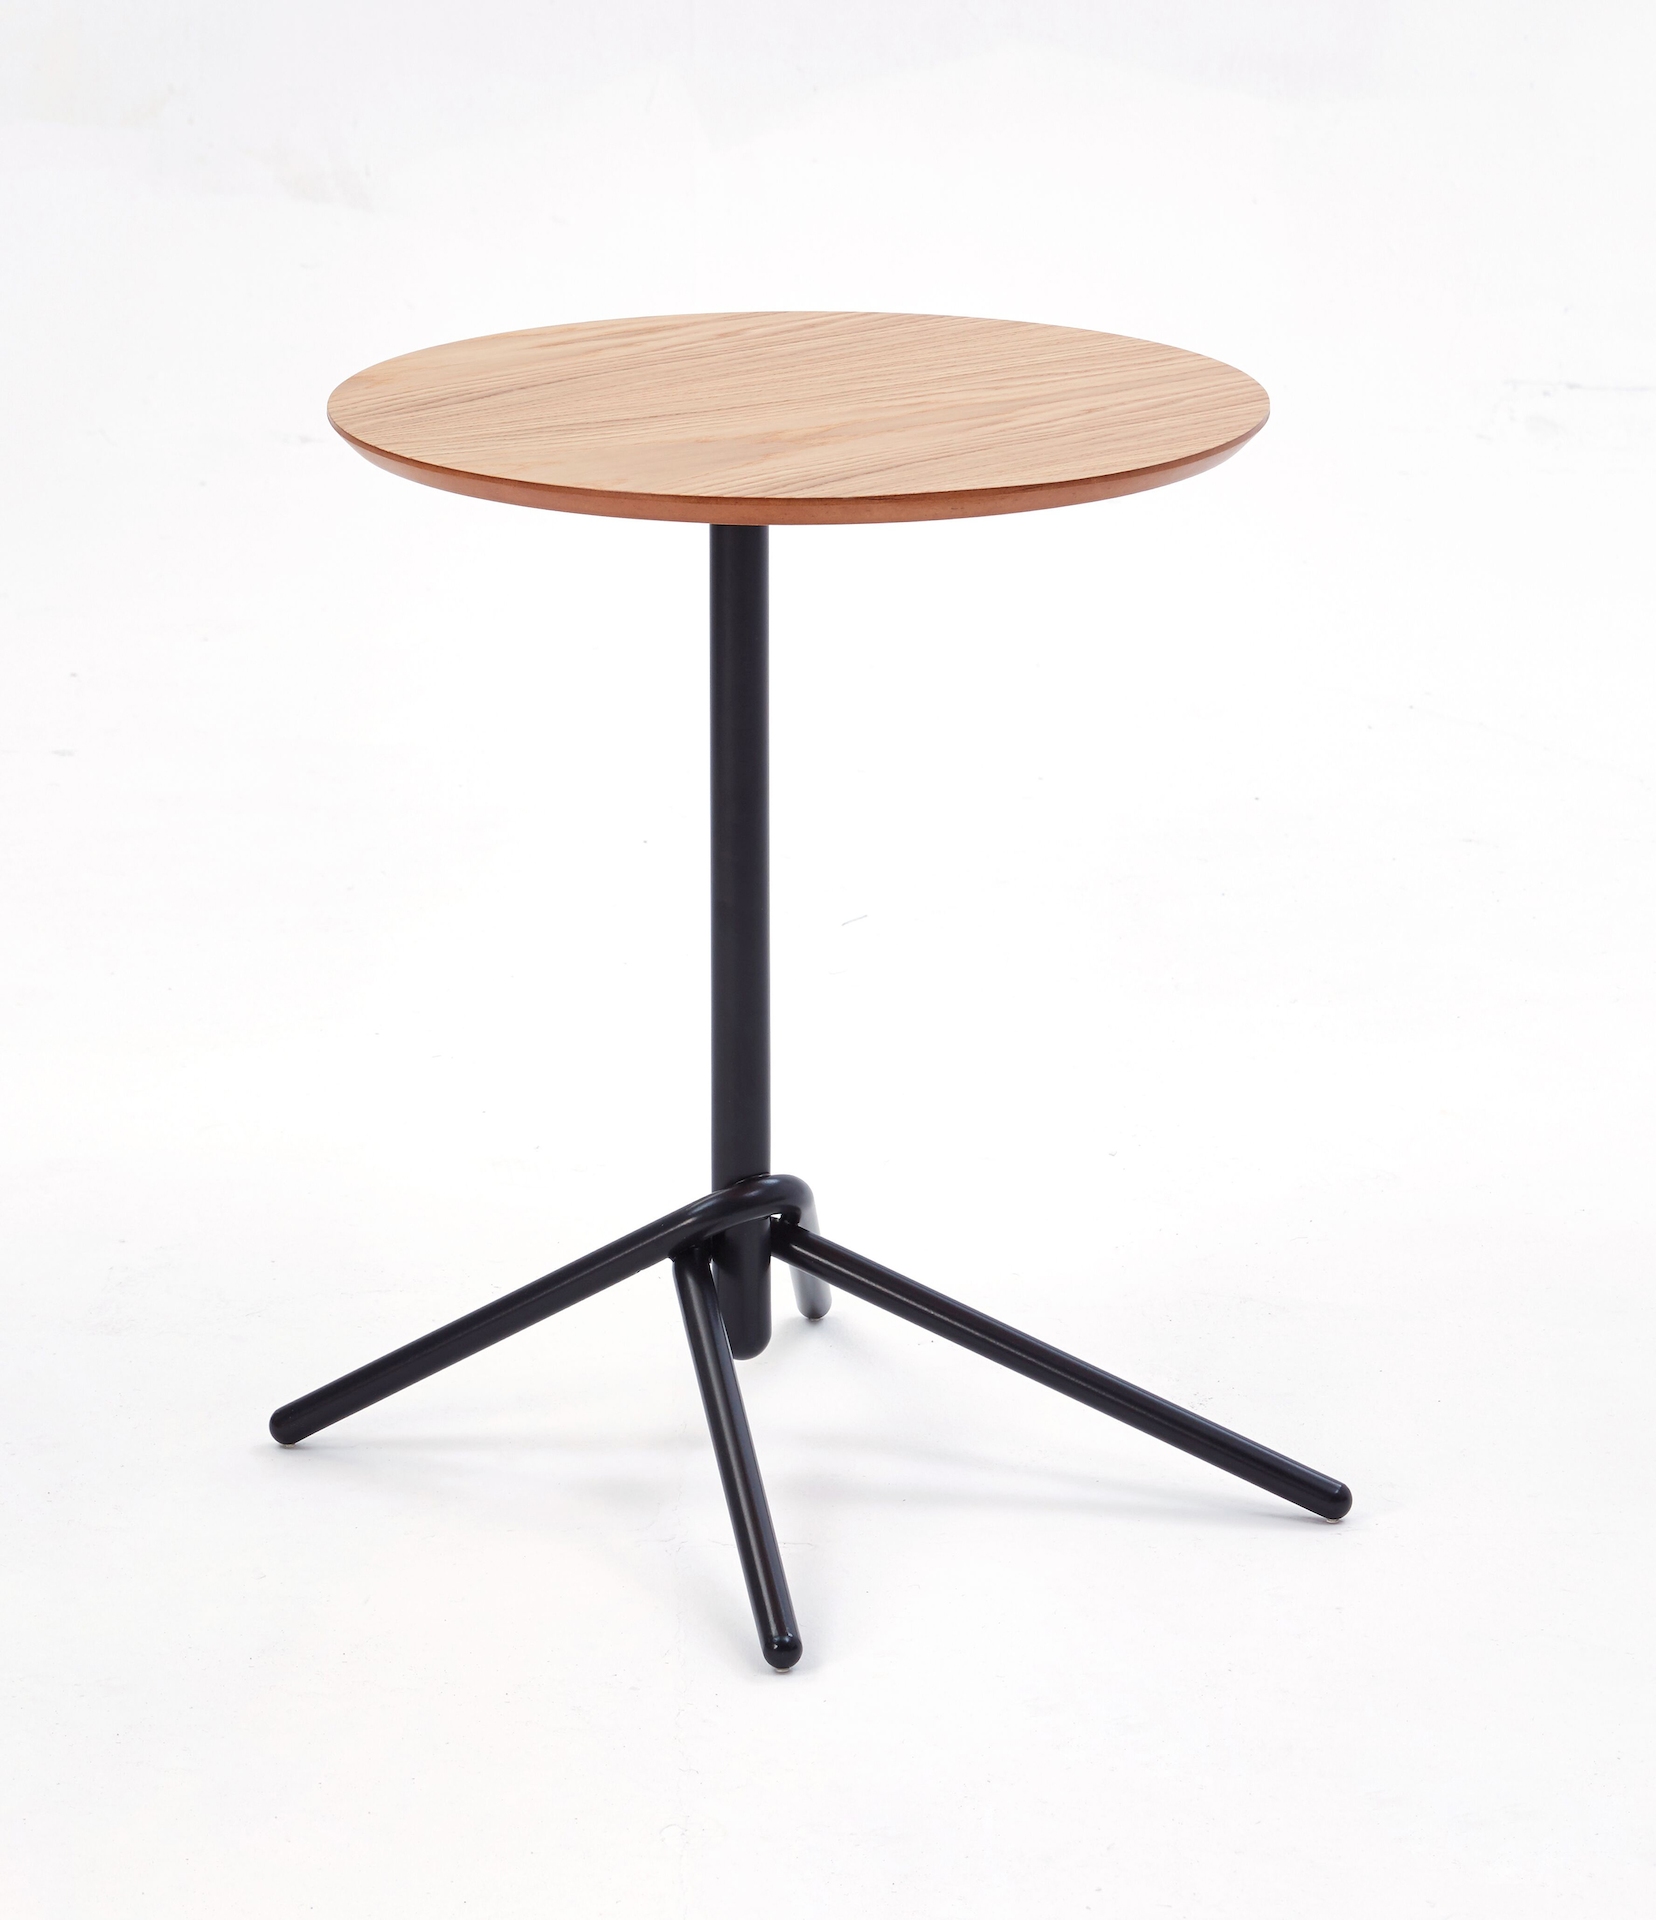 A naughtone Knot Side Table with an oak veneer top and black base.